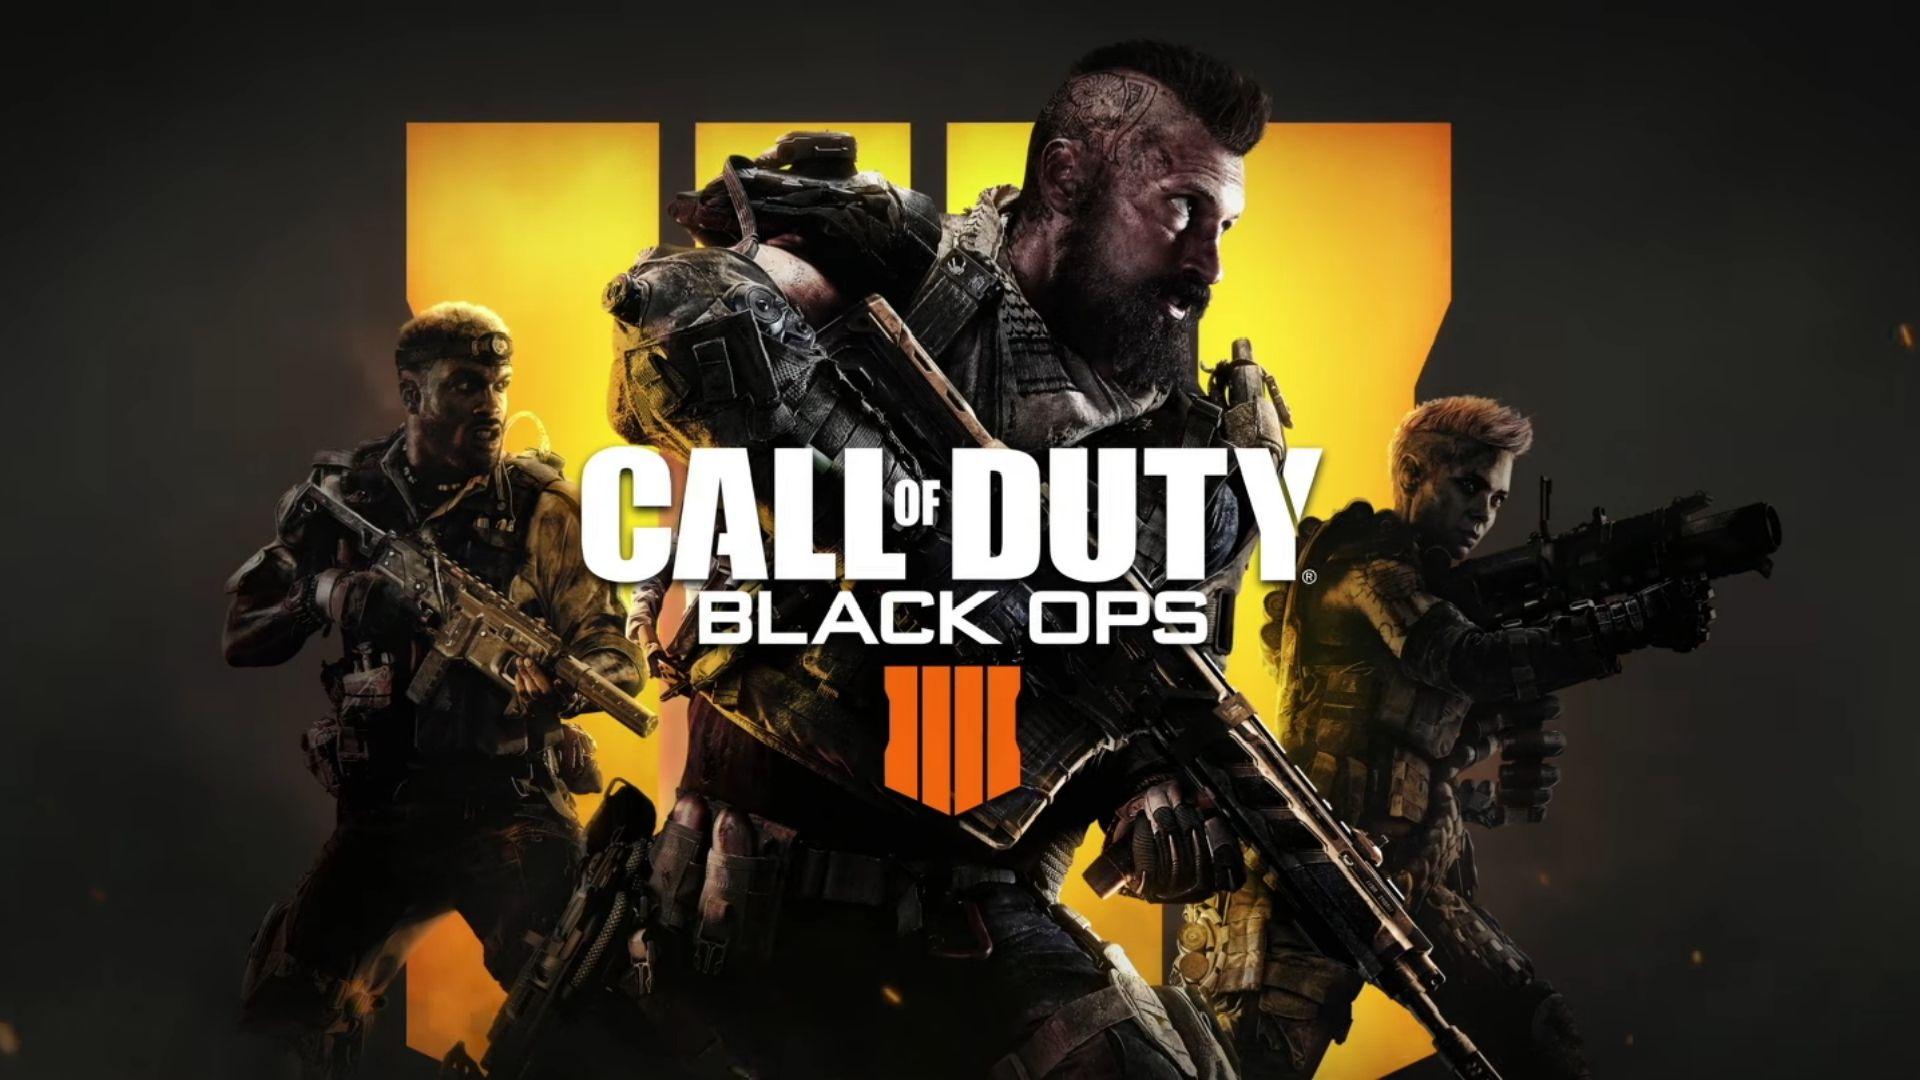 Call of Duty Black Ops 4: Multiplayer beta trailer reveals a small